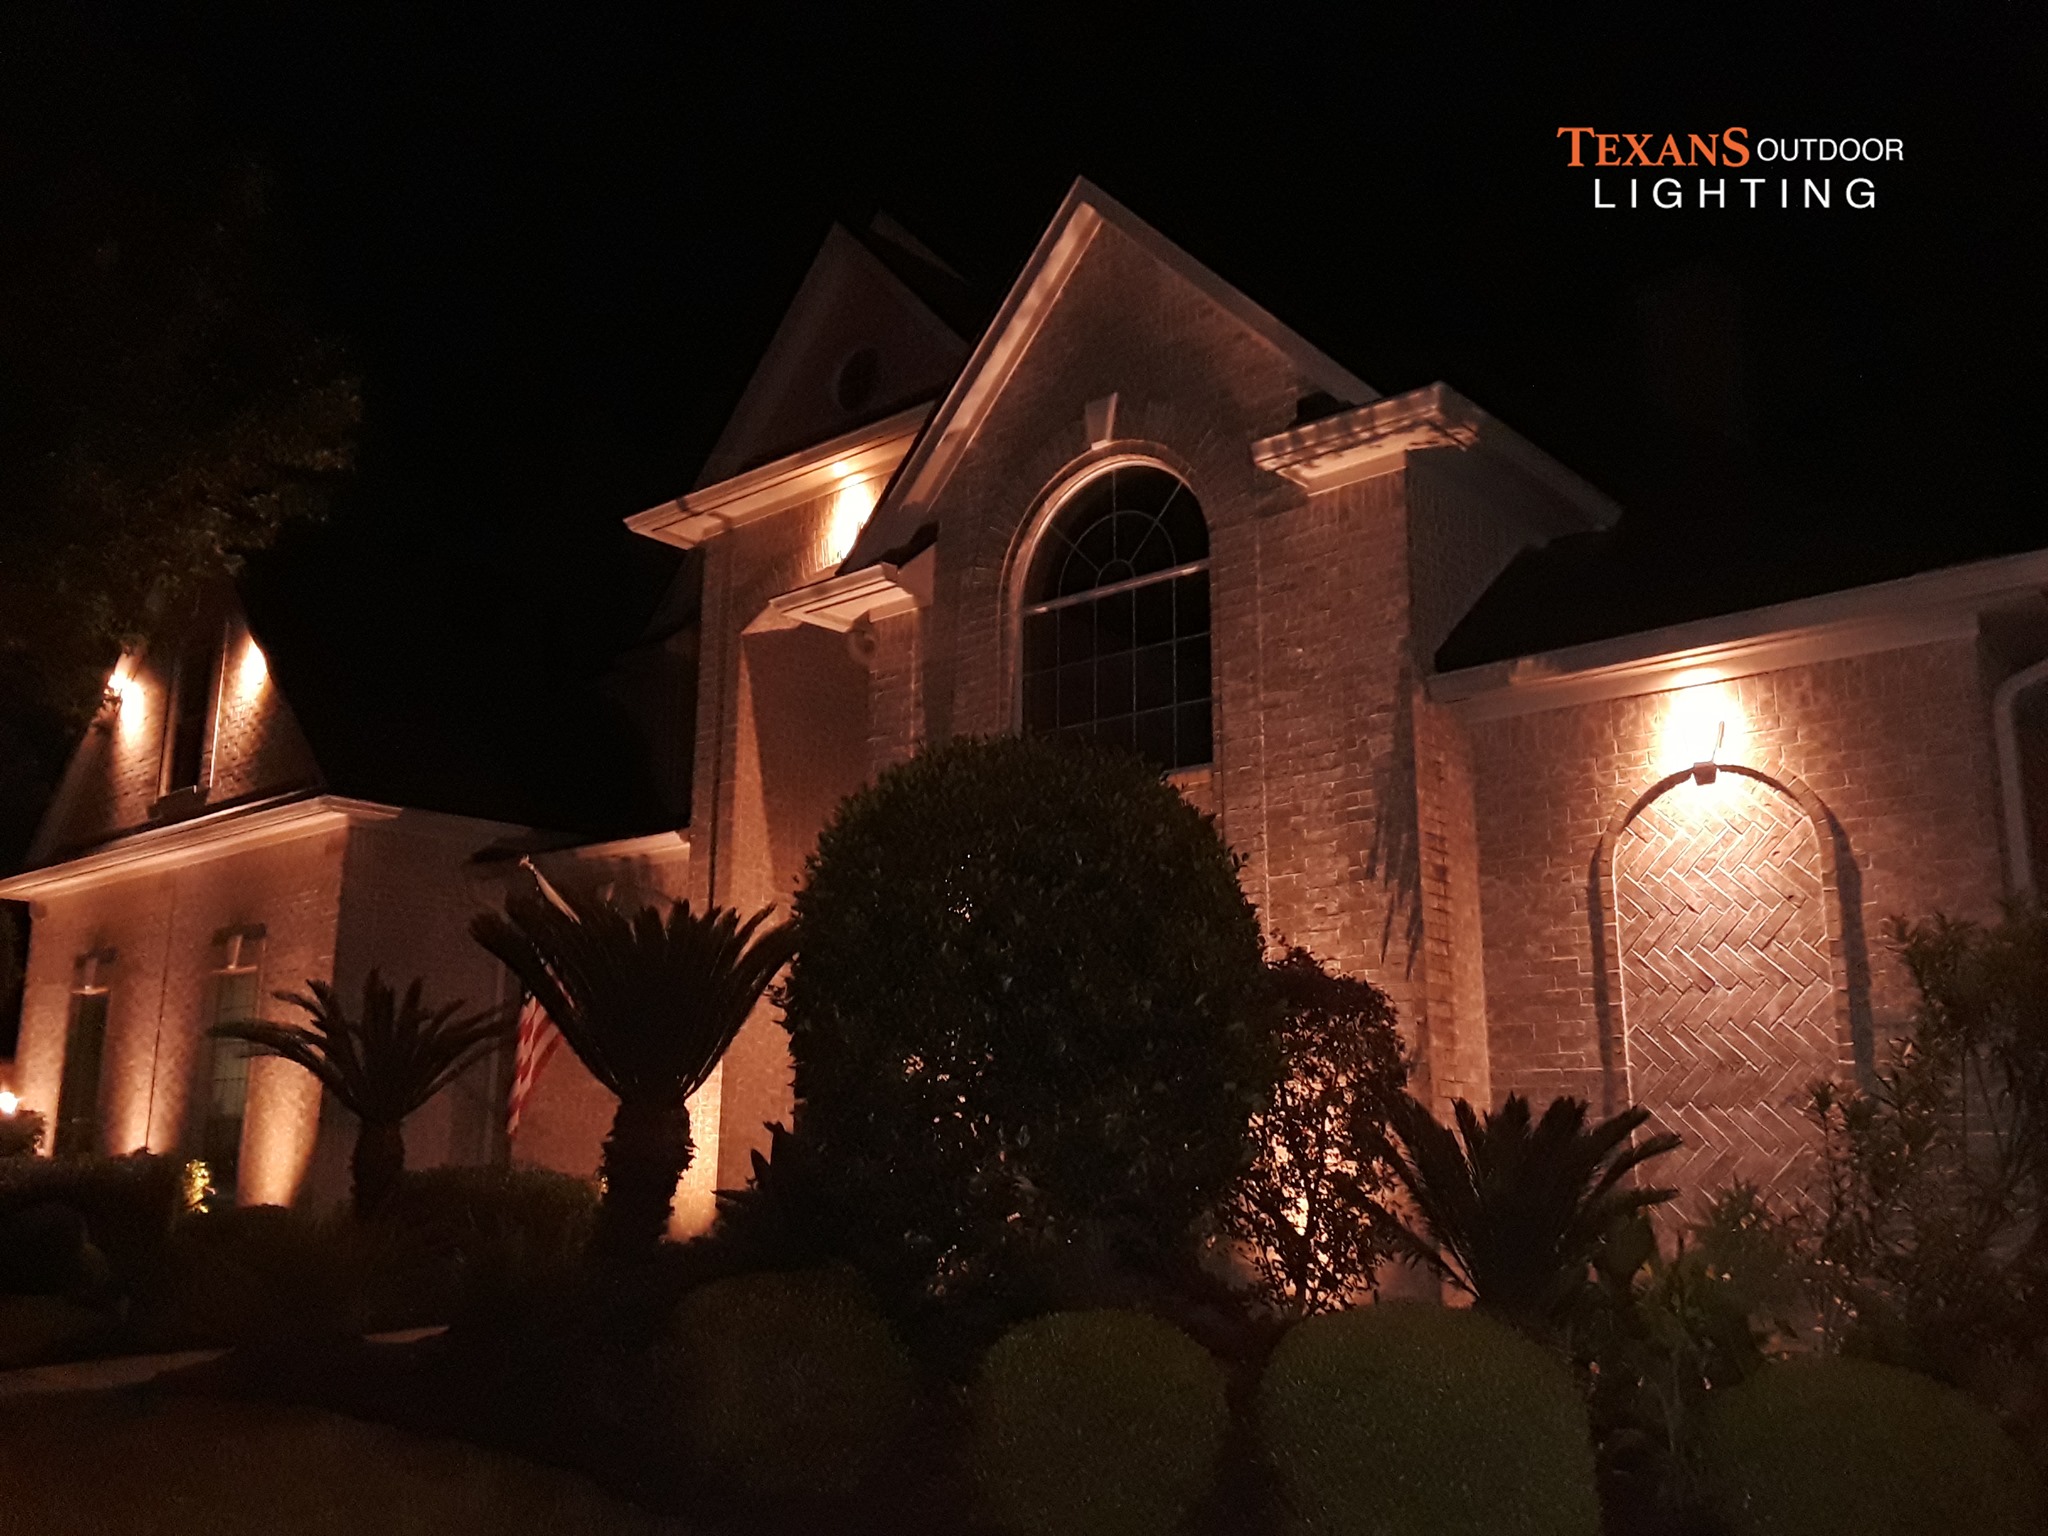 Outdoor Lighting Company Services in The Woodlands